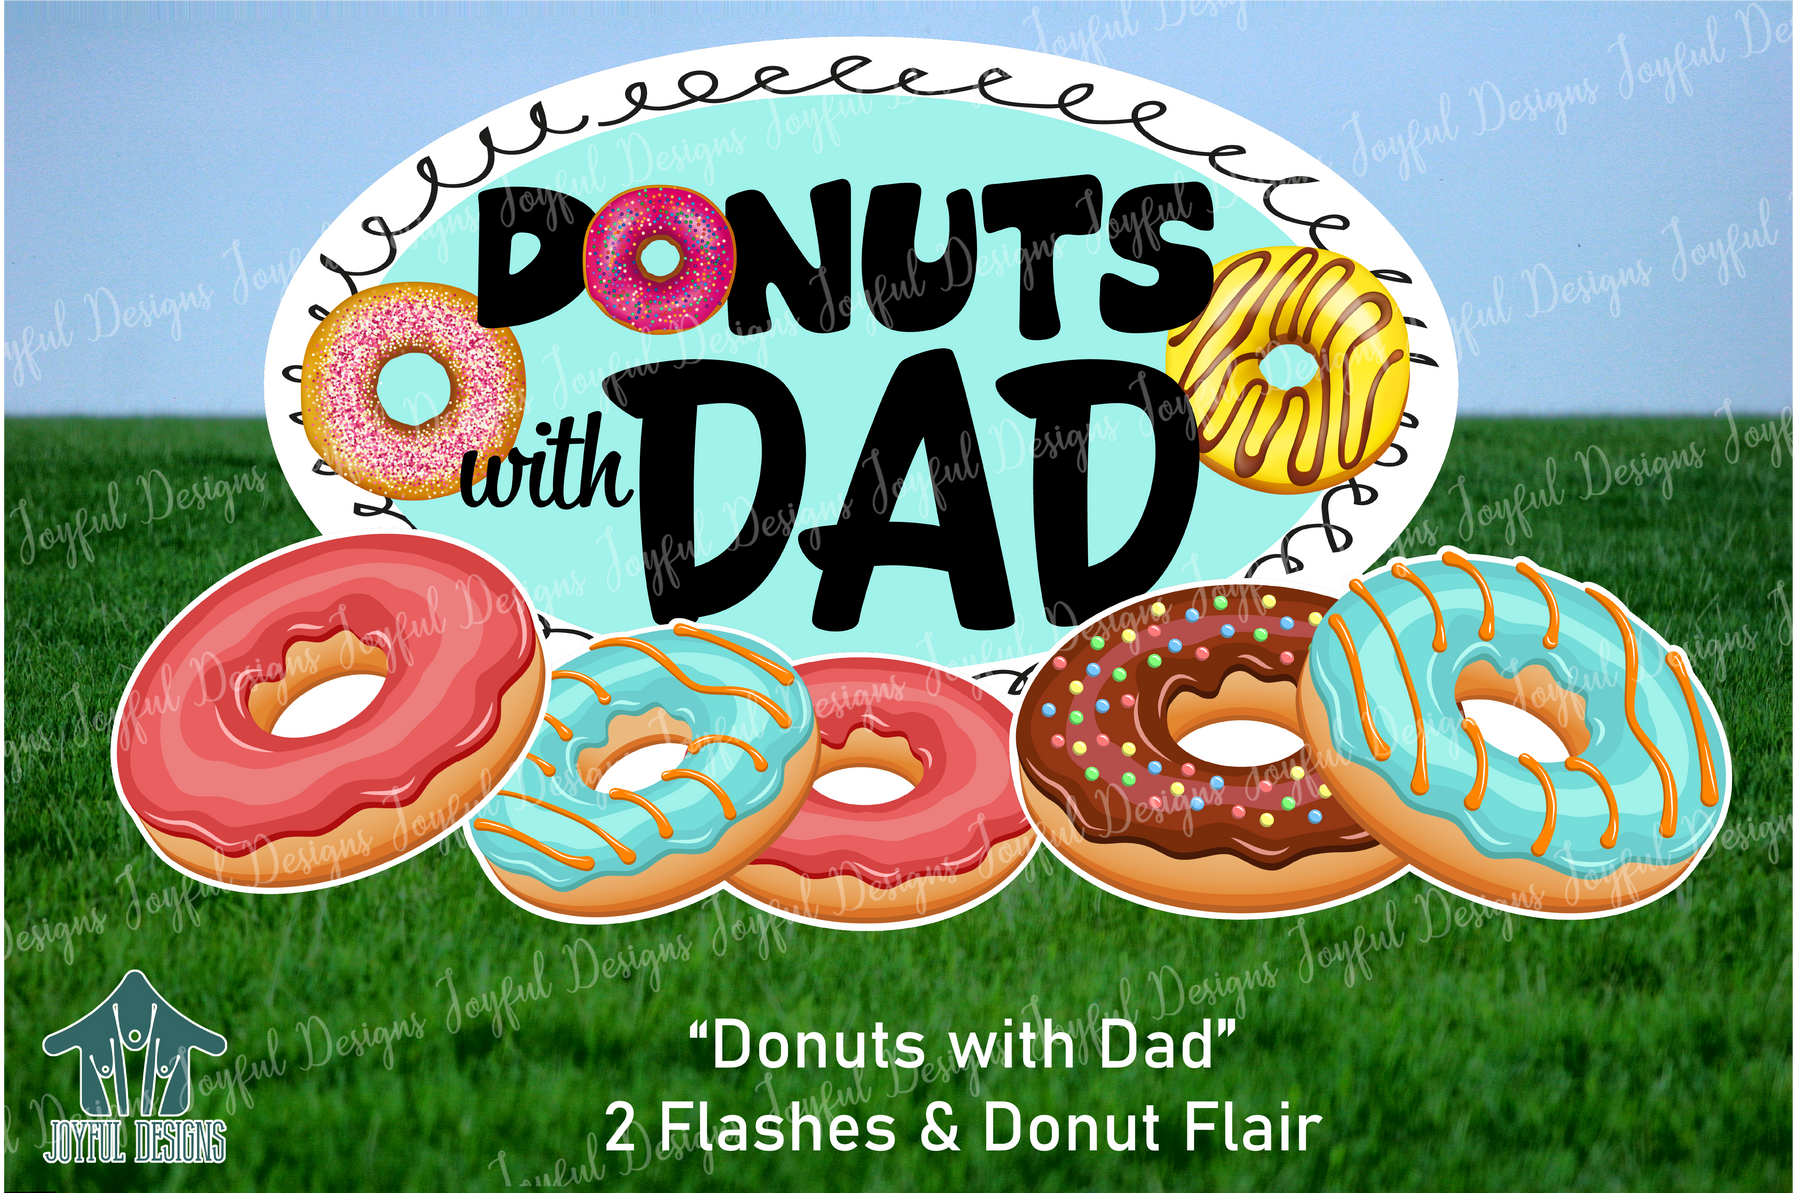 "Donuts with Dad" Centerpiece and Flair